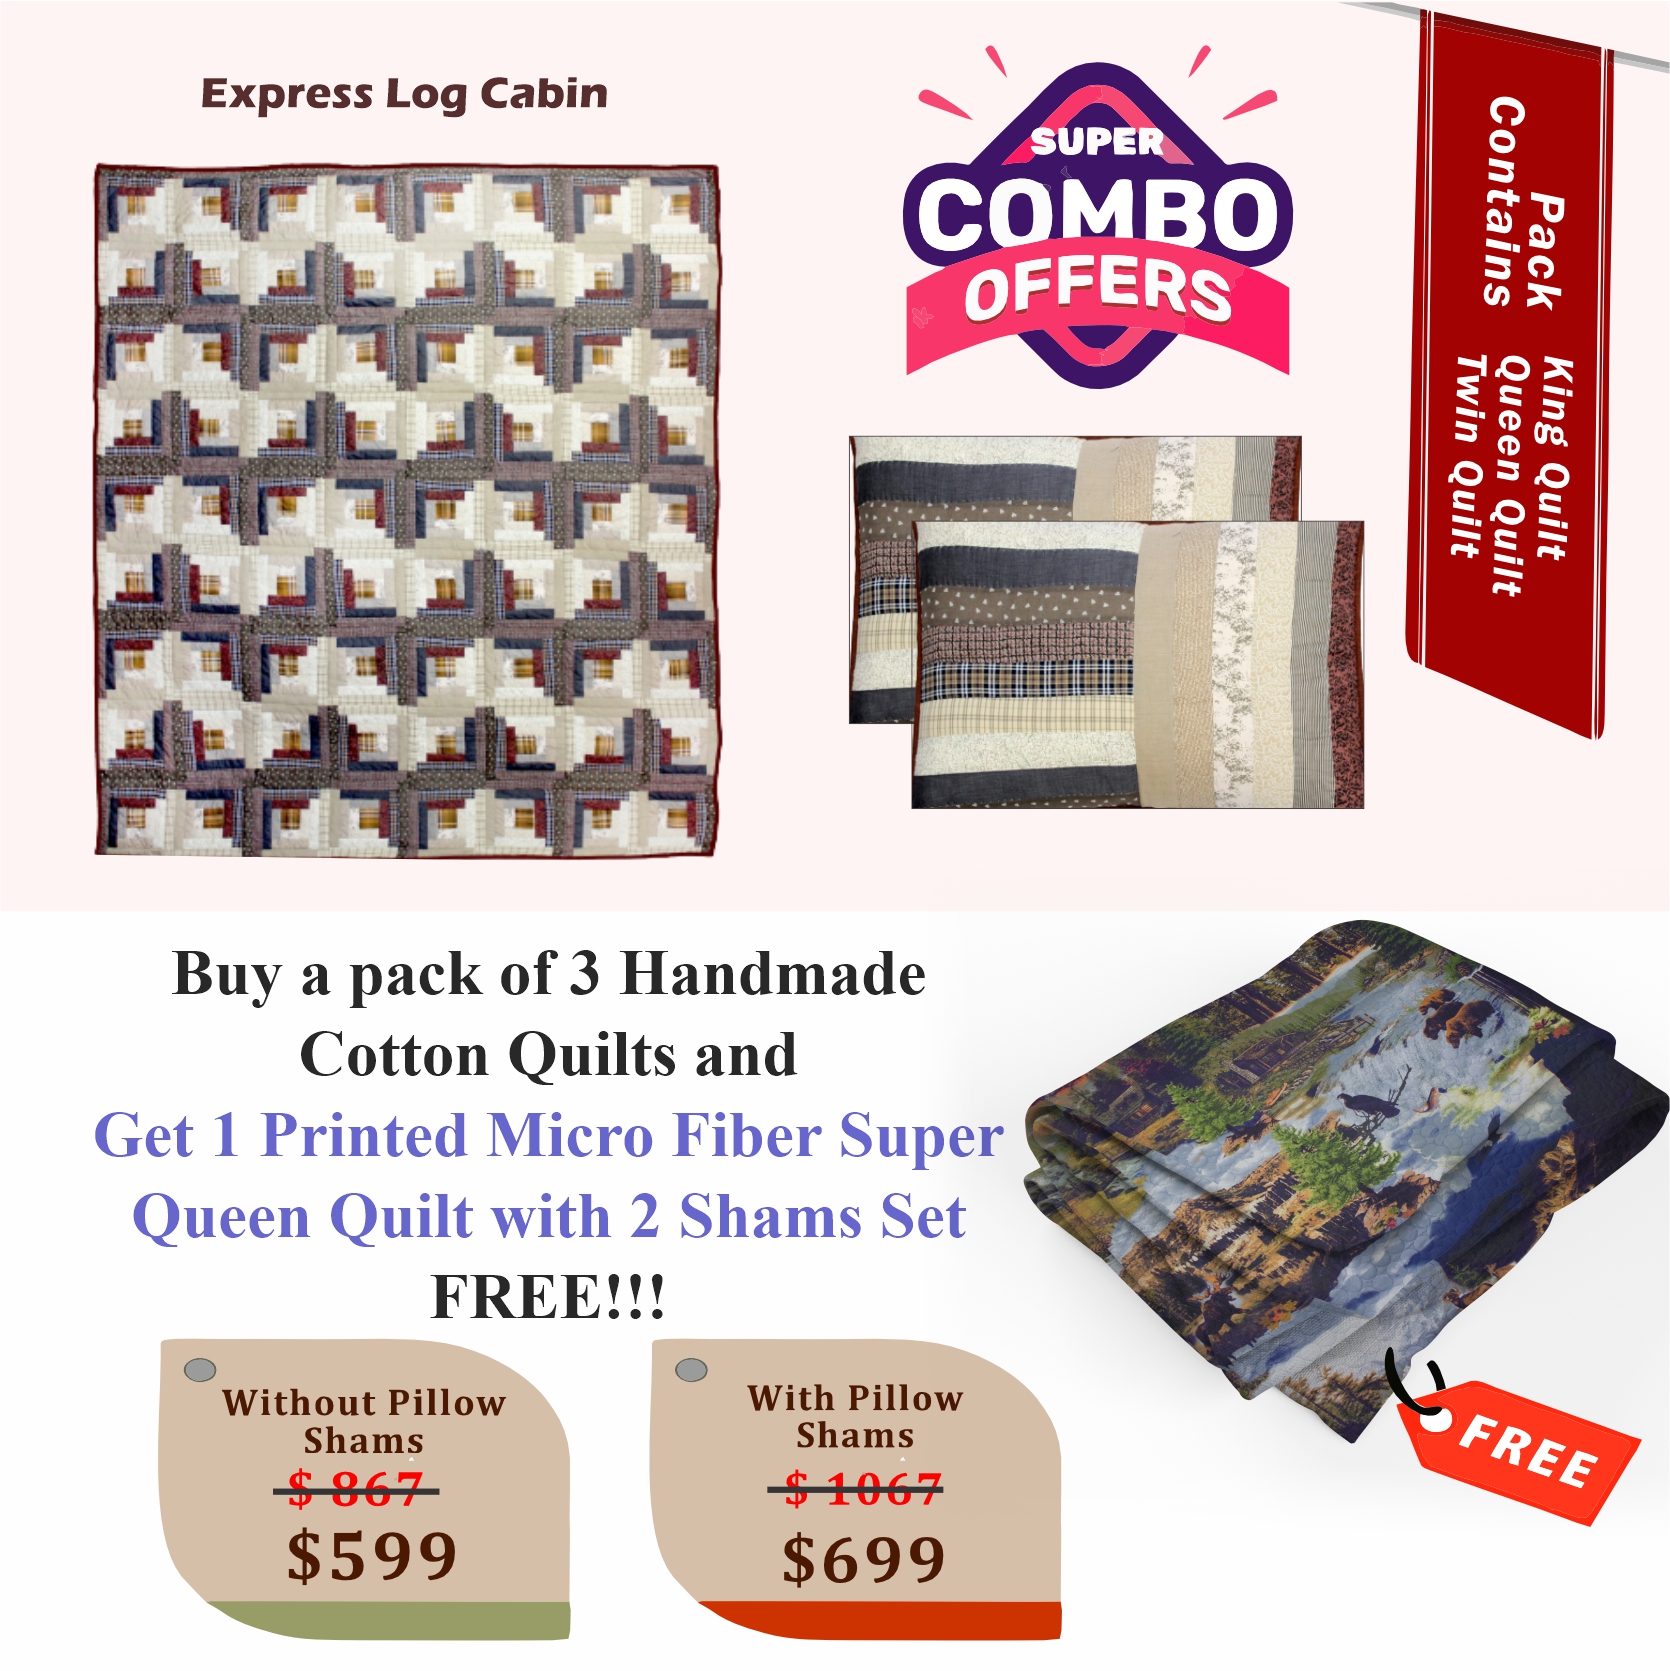 Express Log Cabin - Handmade Cotton quilts  Buy 3 cotton quilts and get 1 Printed Microfiber Super Queen Quilt with 2 Shams set FREE